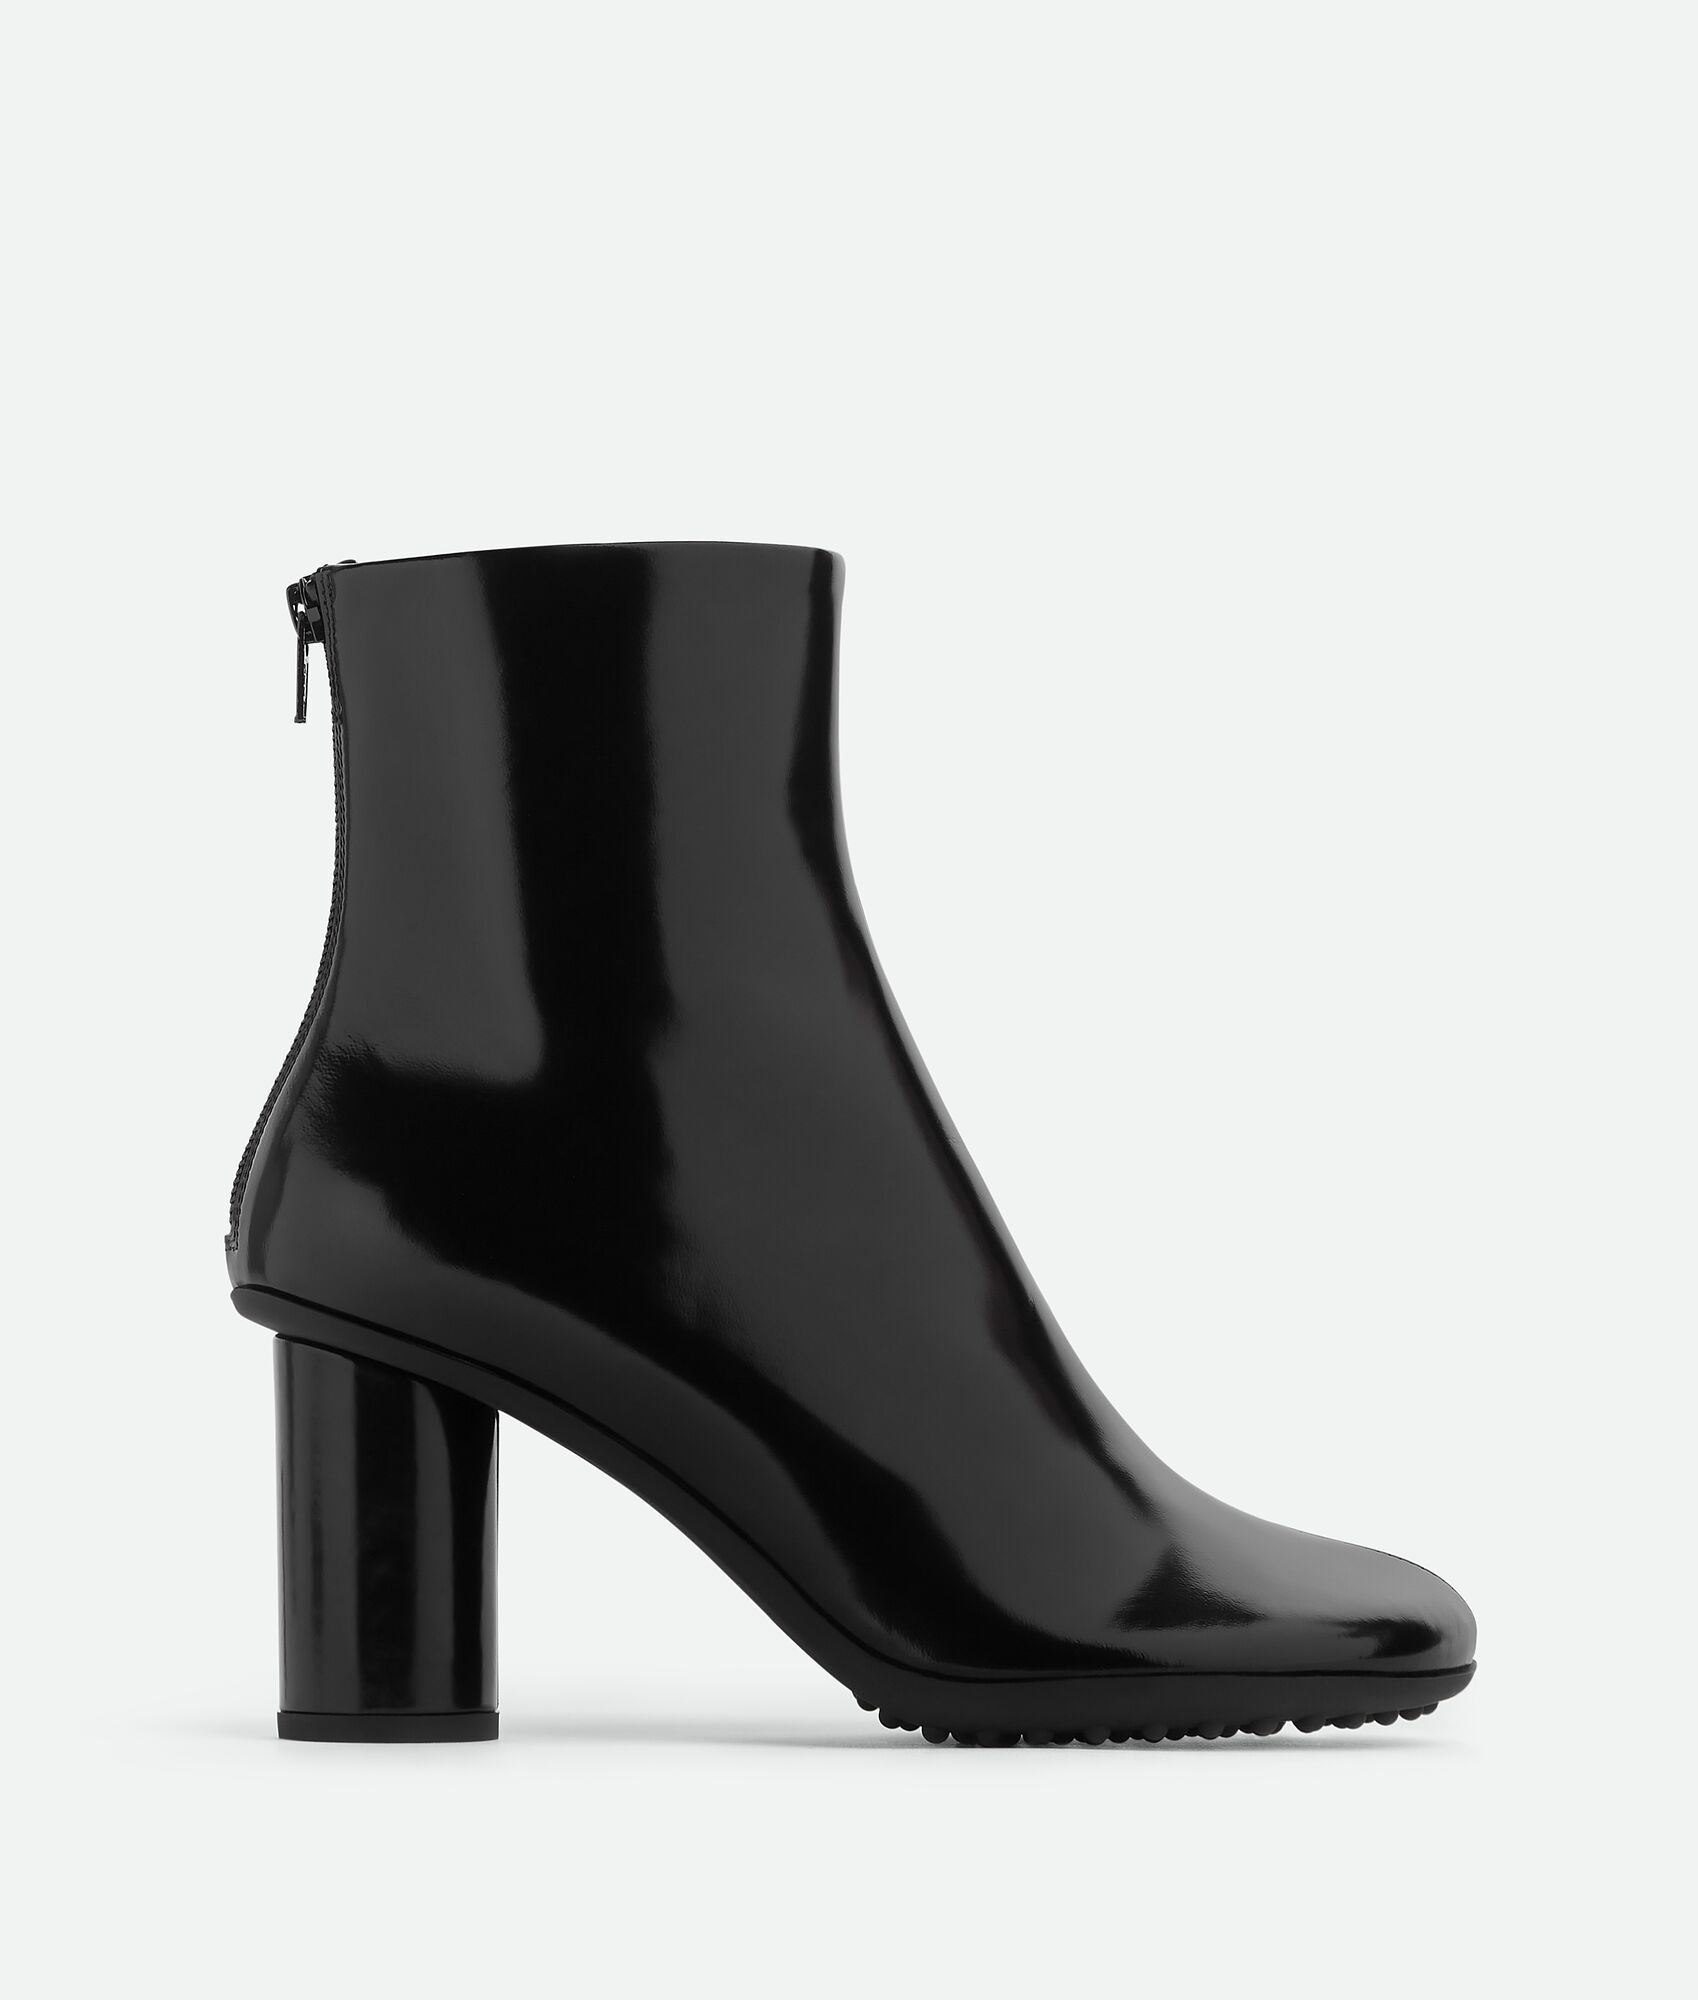 Atomic Ankle Boot - 1